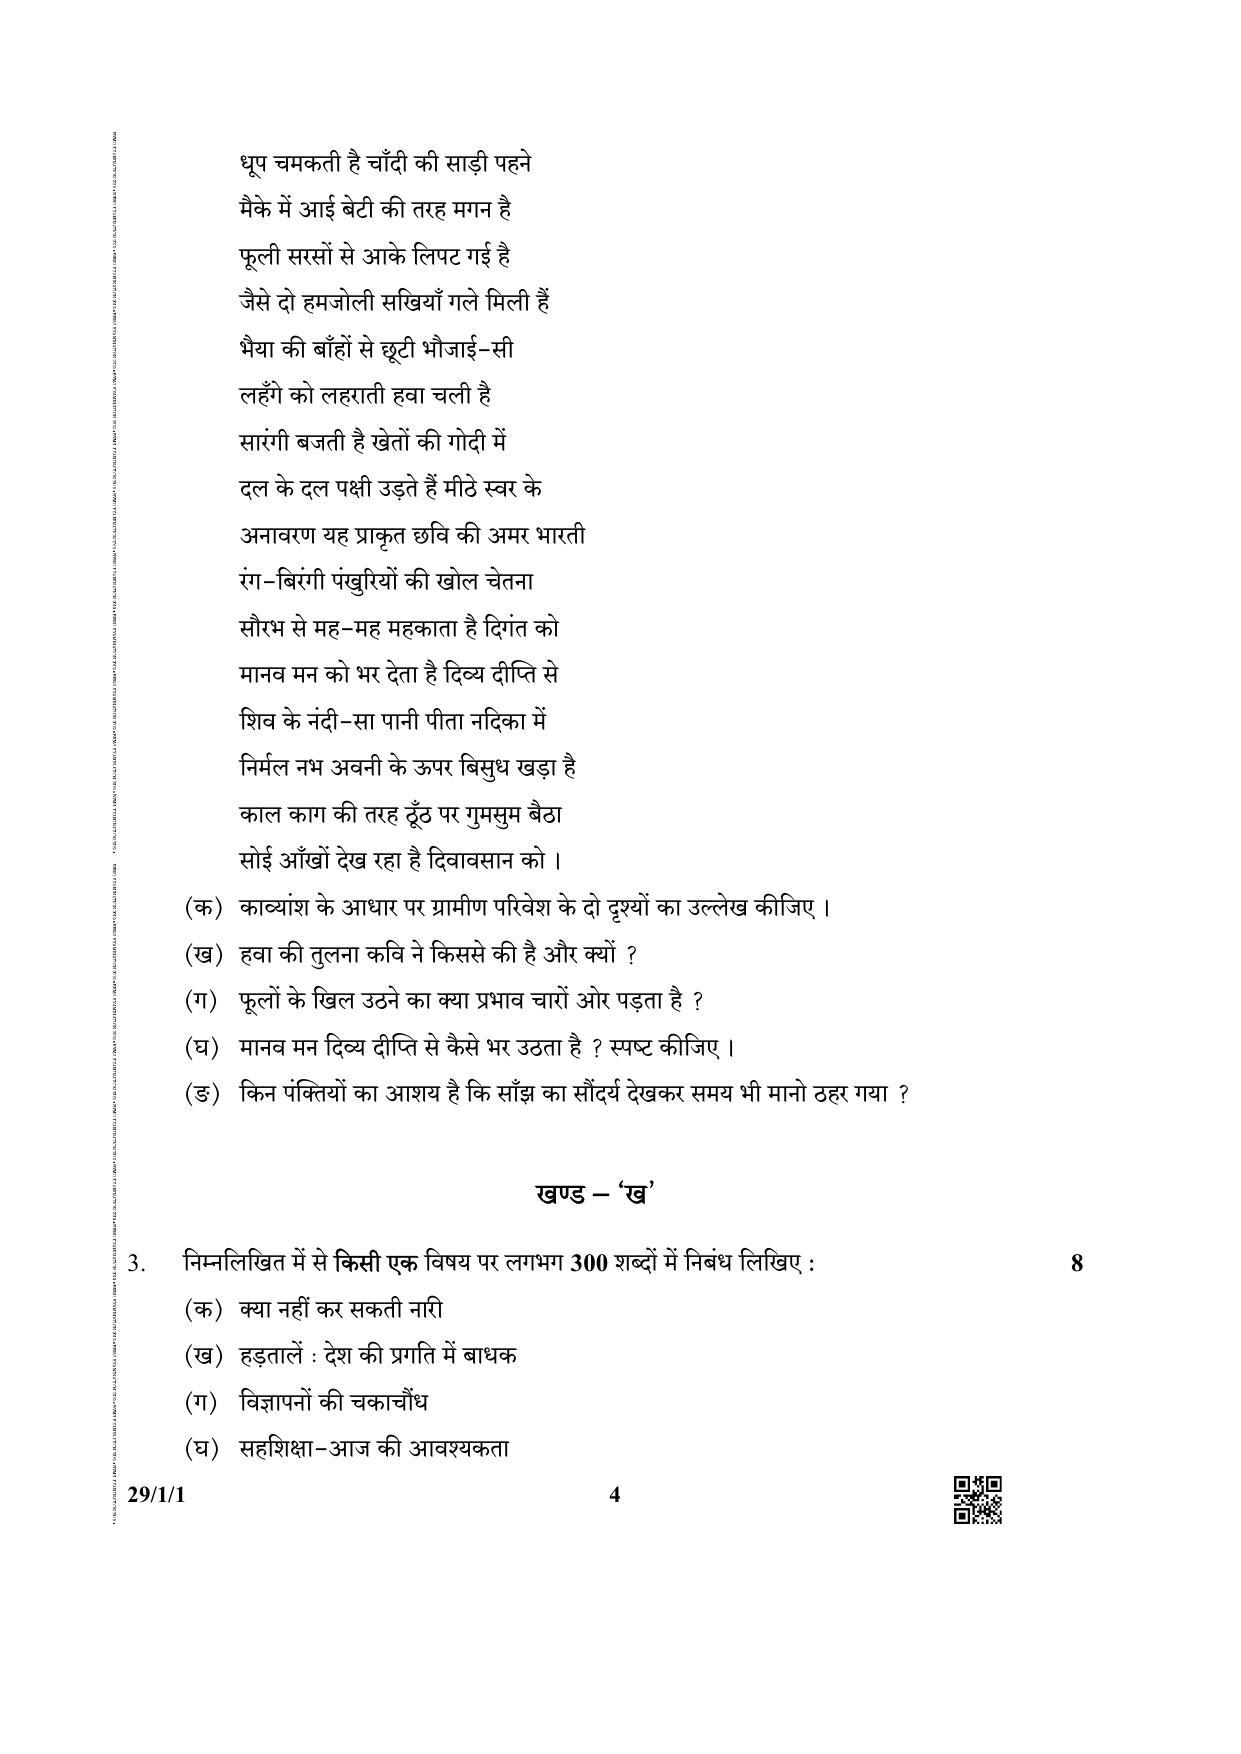 CBSE Class 12 29-1-1 (Hindi ELECTIVE) 2019 Question Paper - Page 4